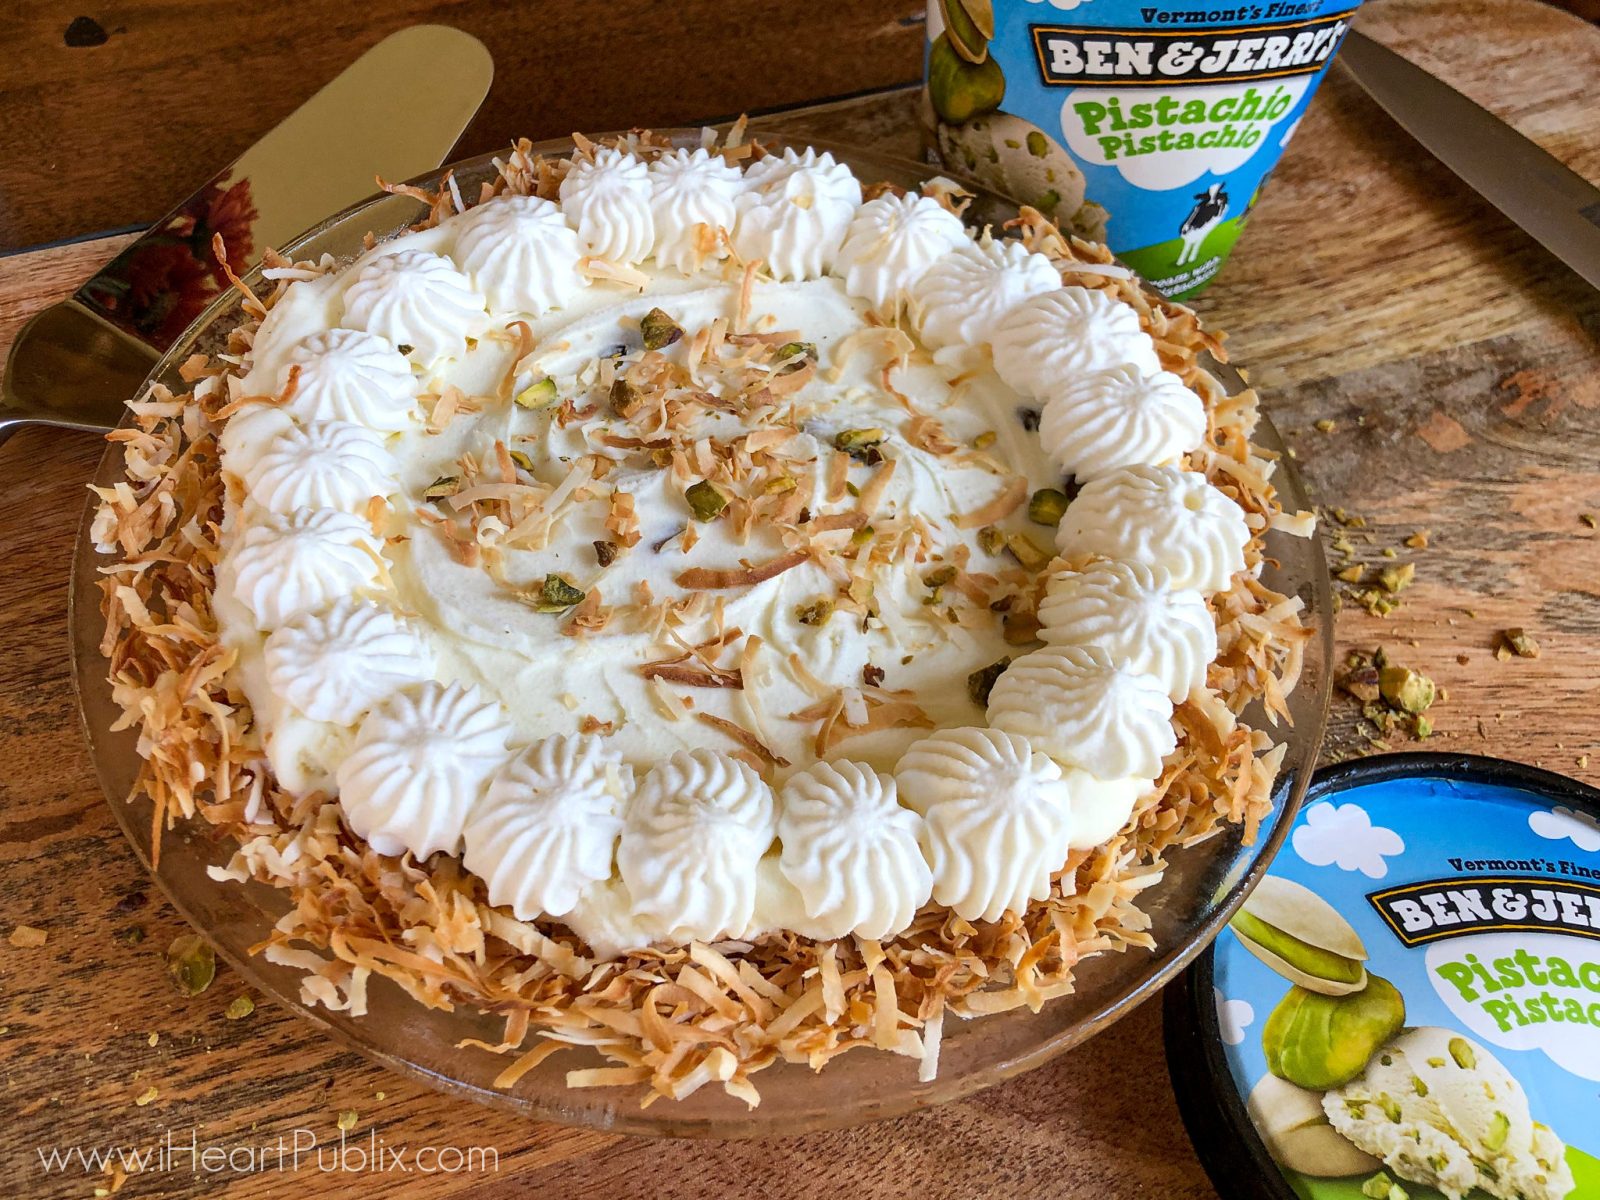 Need An Easy Dessert? Try My Coconut Pistachio Ice Cream Pie + Look For AMAZING Deals On Ice Cream At Publix